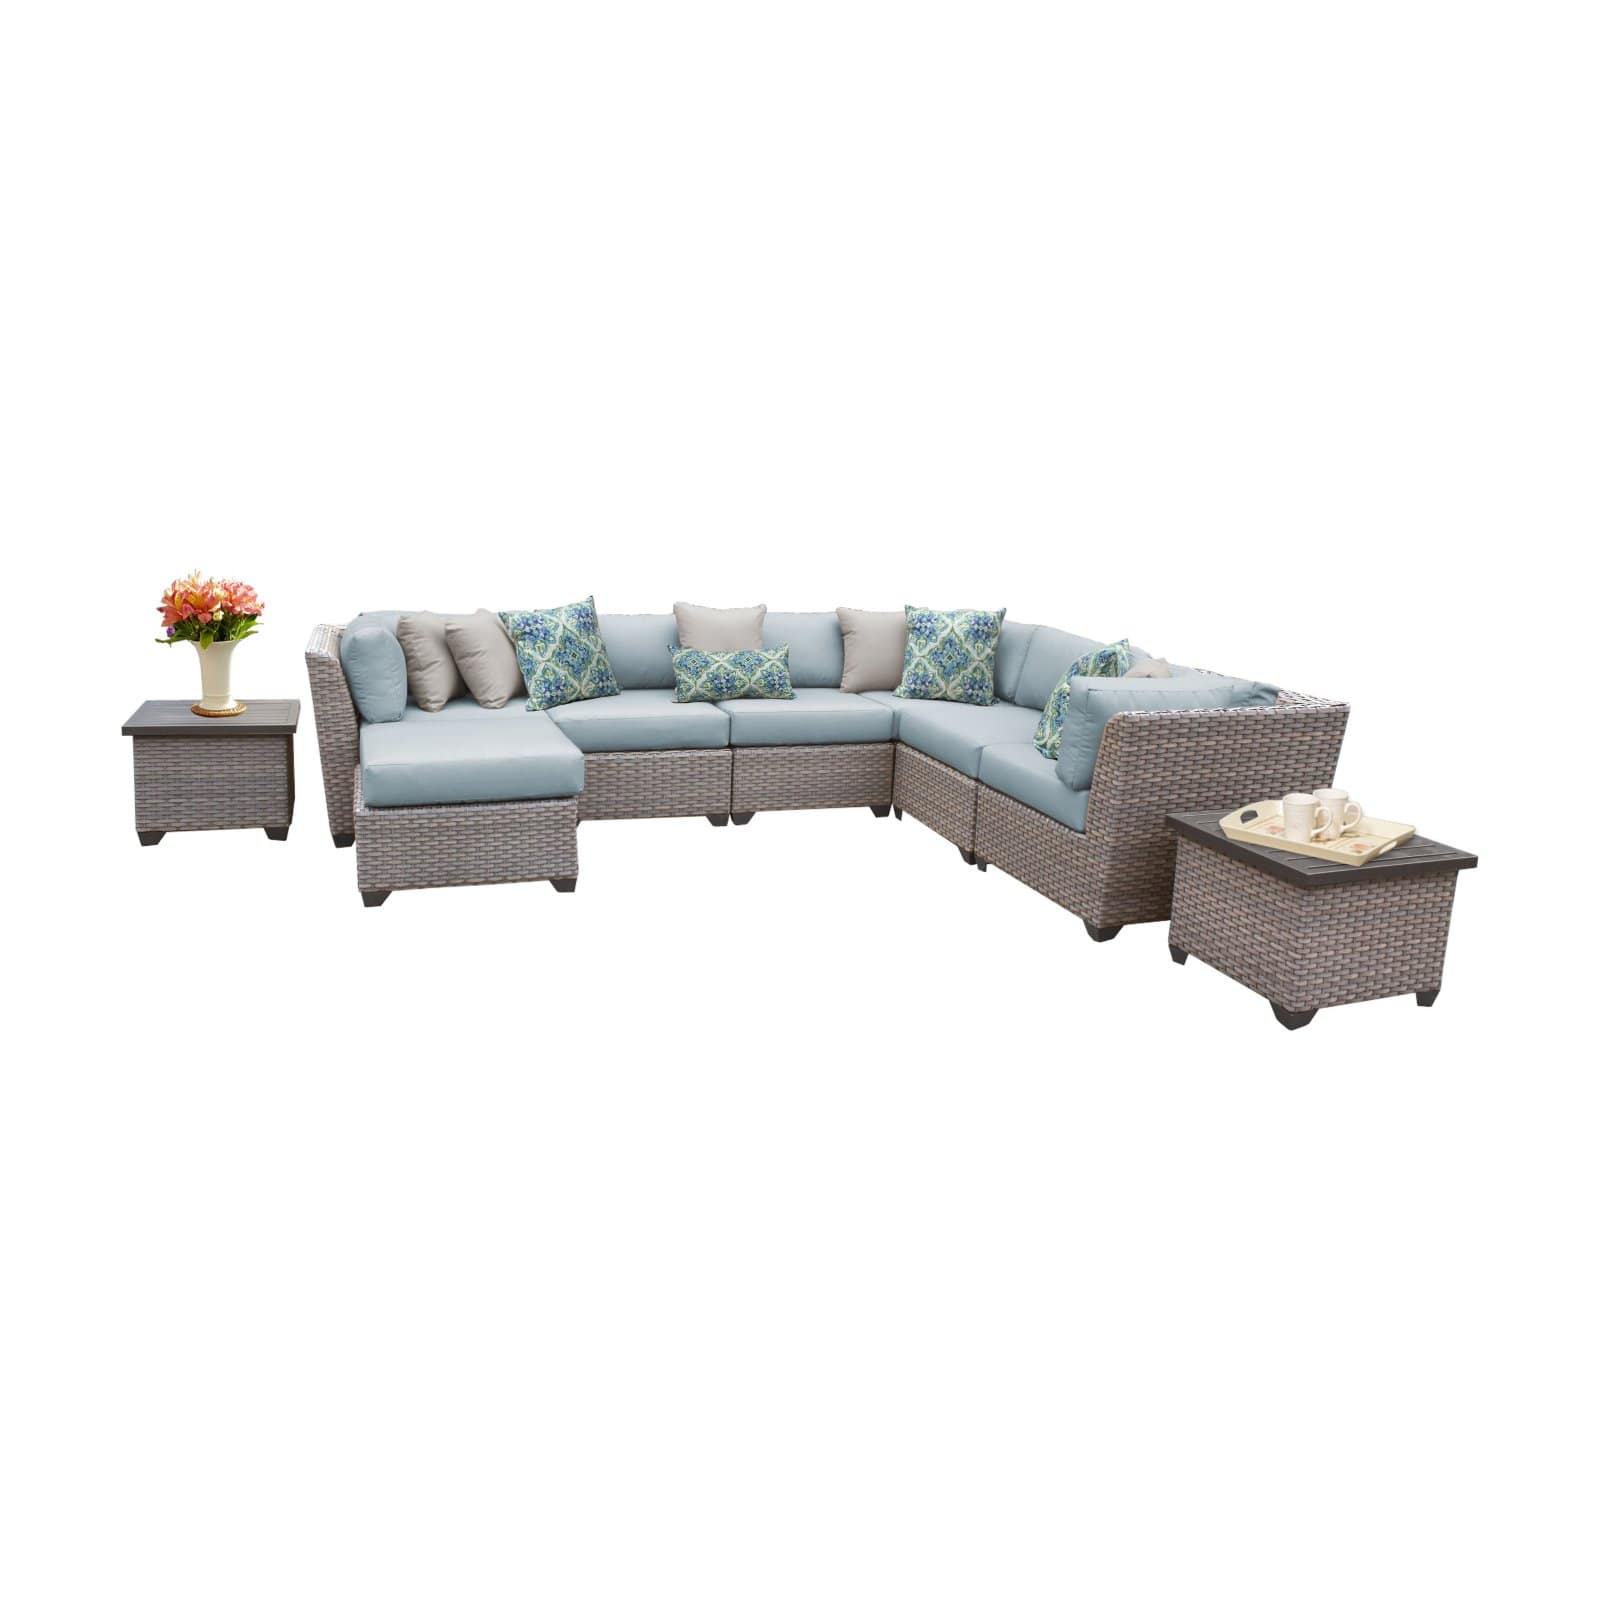 TK Classics Florence Wicker 9 Piece Patio Conversation Set with Ottoman and 2 Sets of Cushion Covers - image 2 of 2